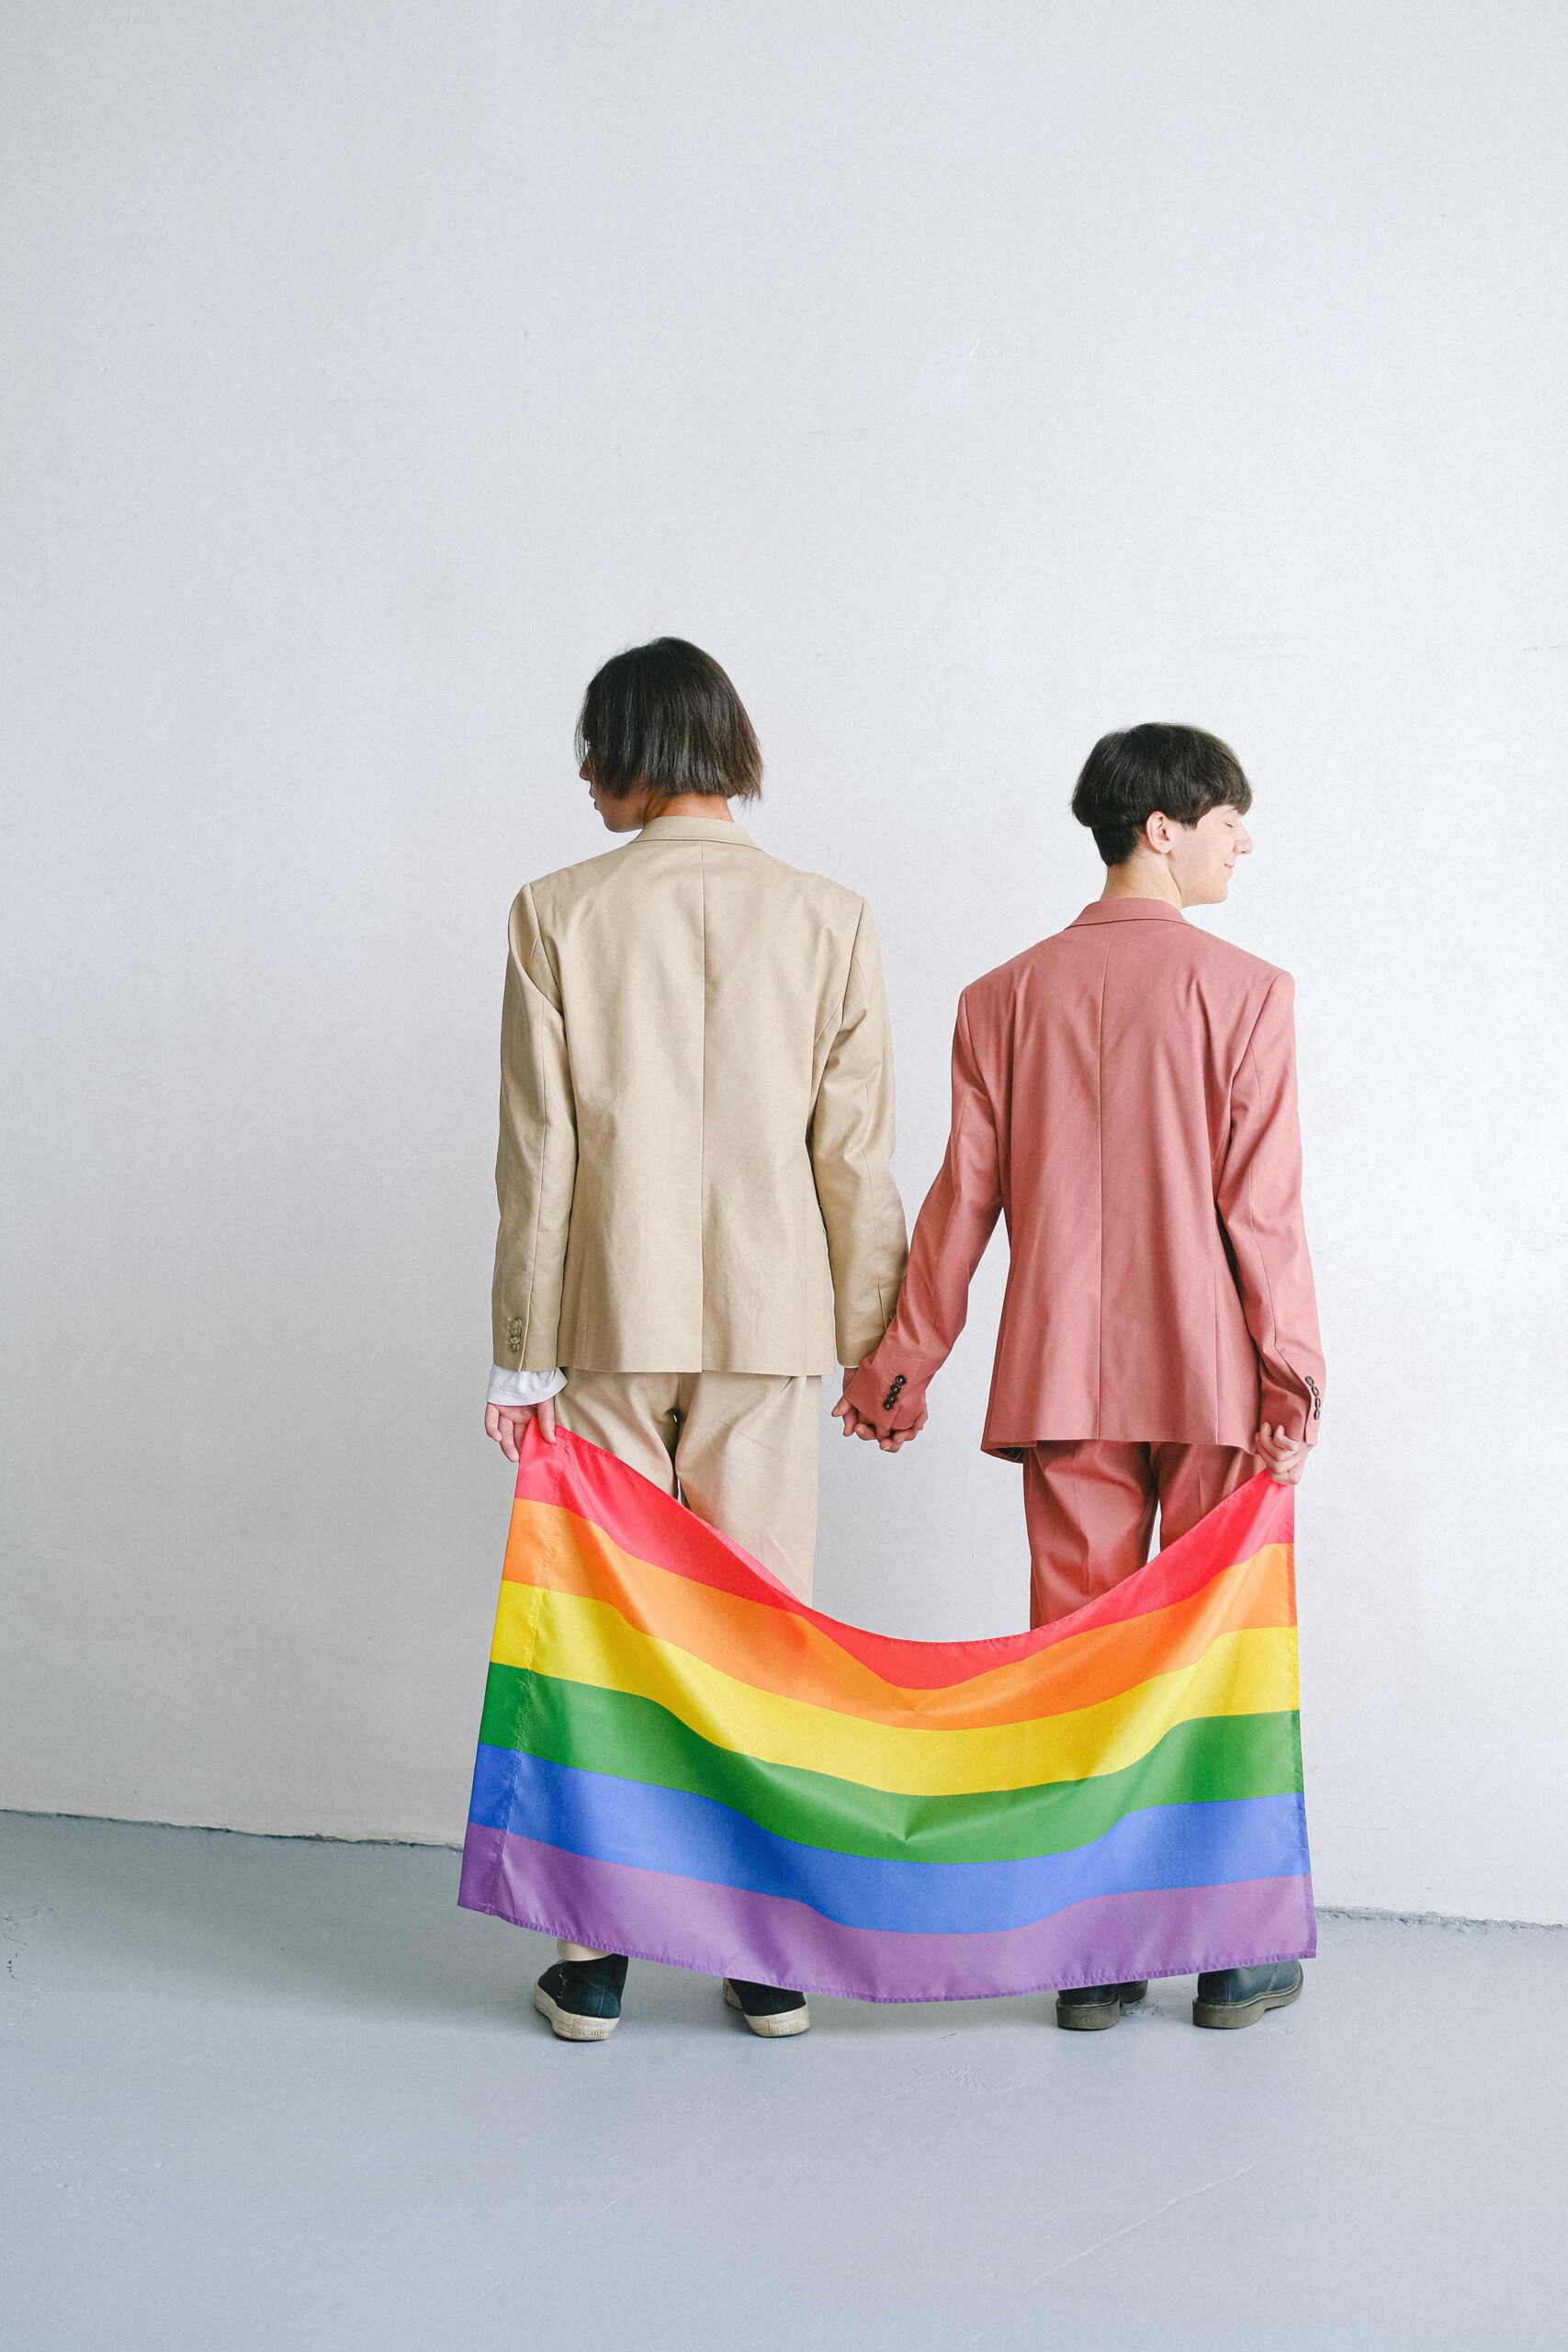 Two people holing hands and a Pride flag